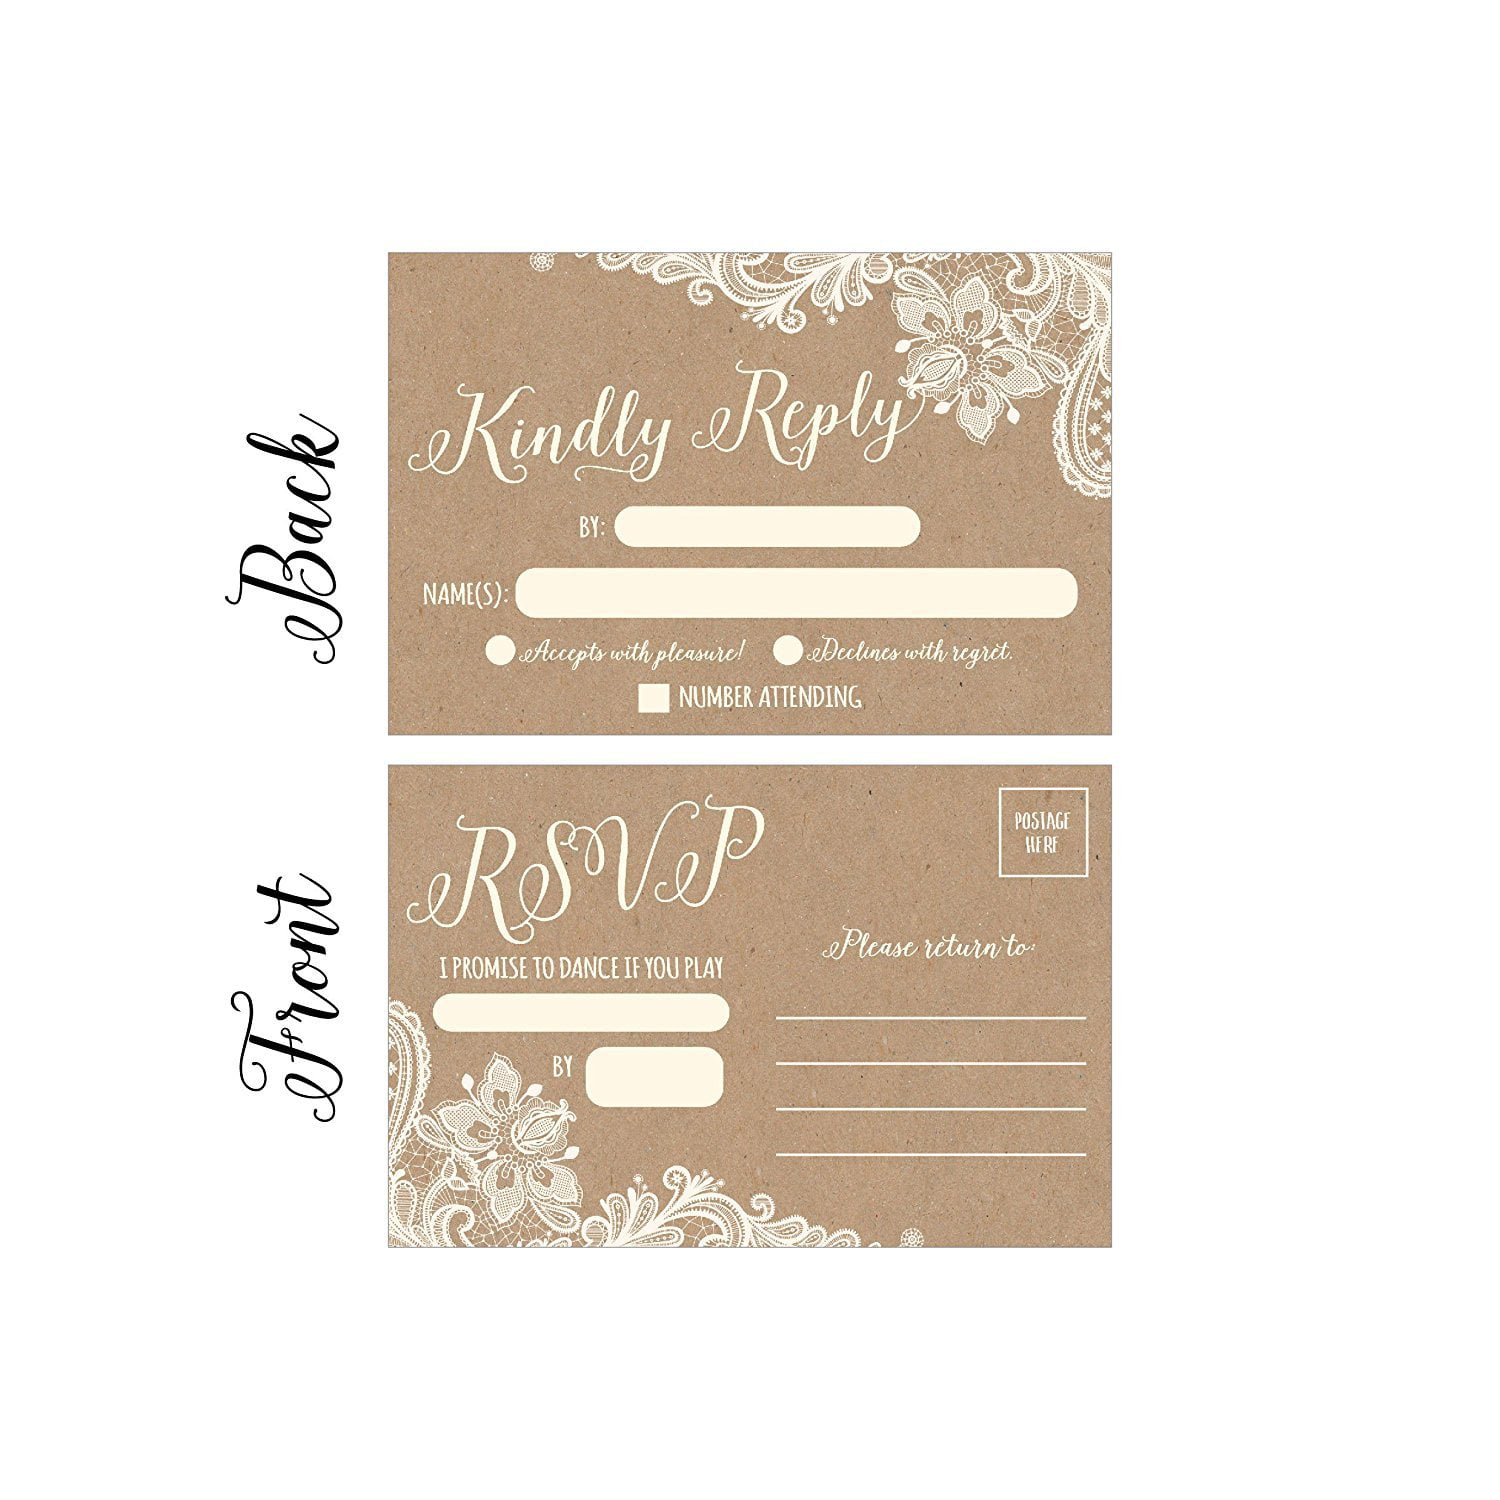 20 RSVP Post Cards for wedding Invitation Response Rustic White Lace Postcards 